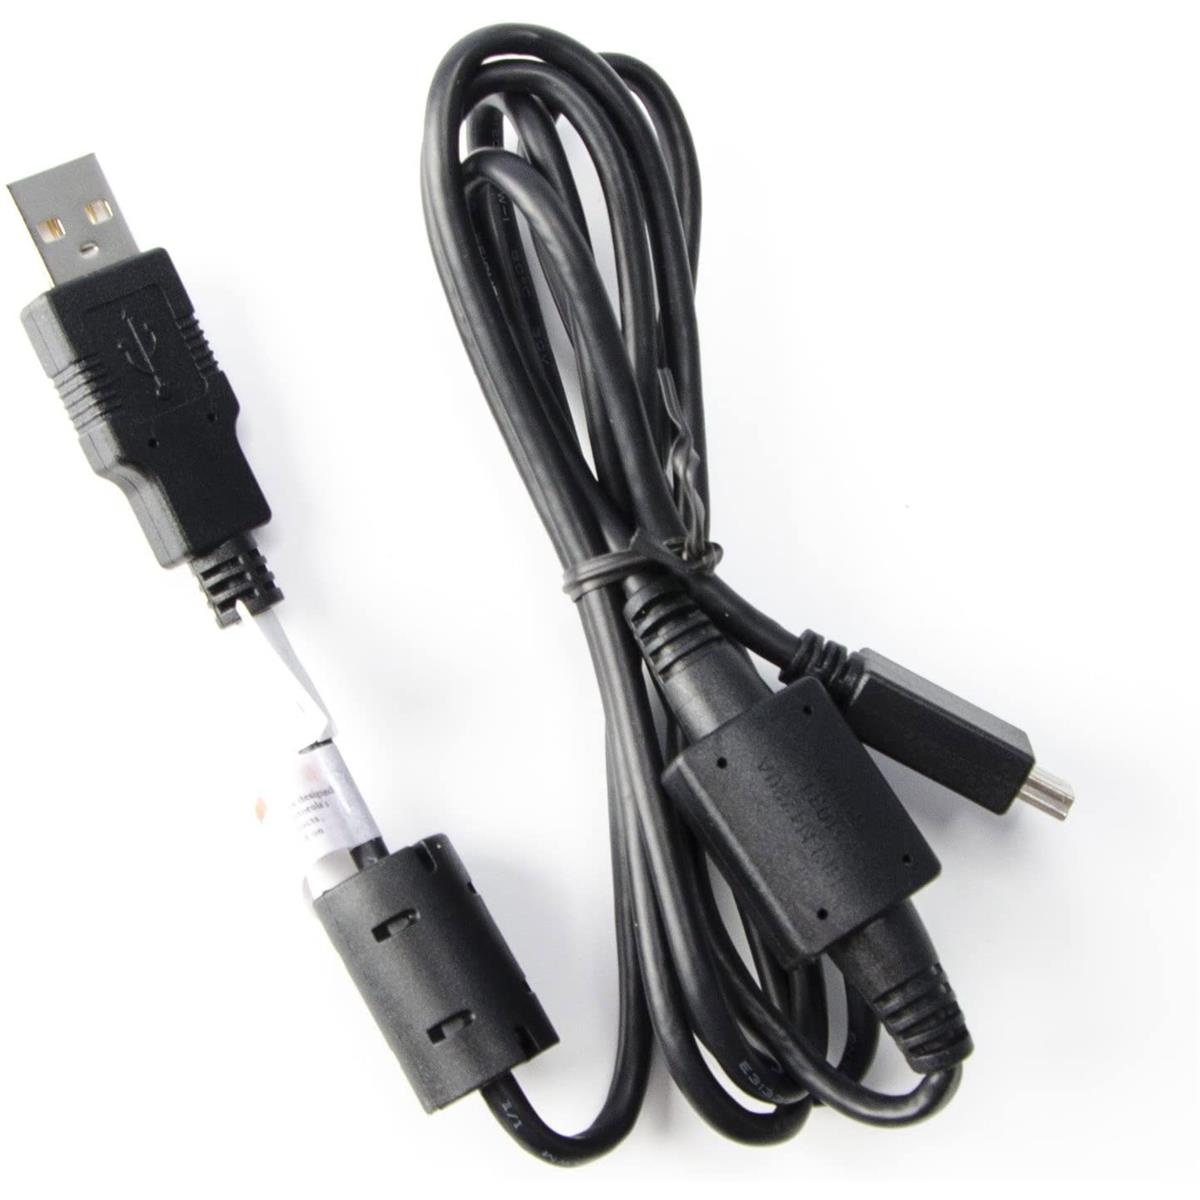 

Motorola Micro-USB Male to USB Type A Male CPS Programming Cable